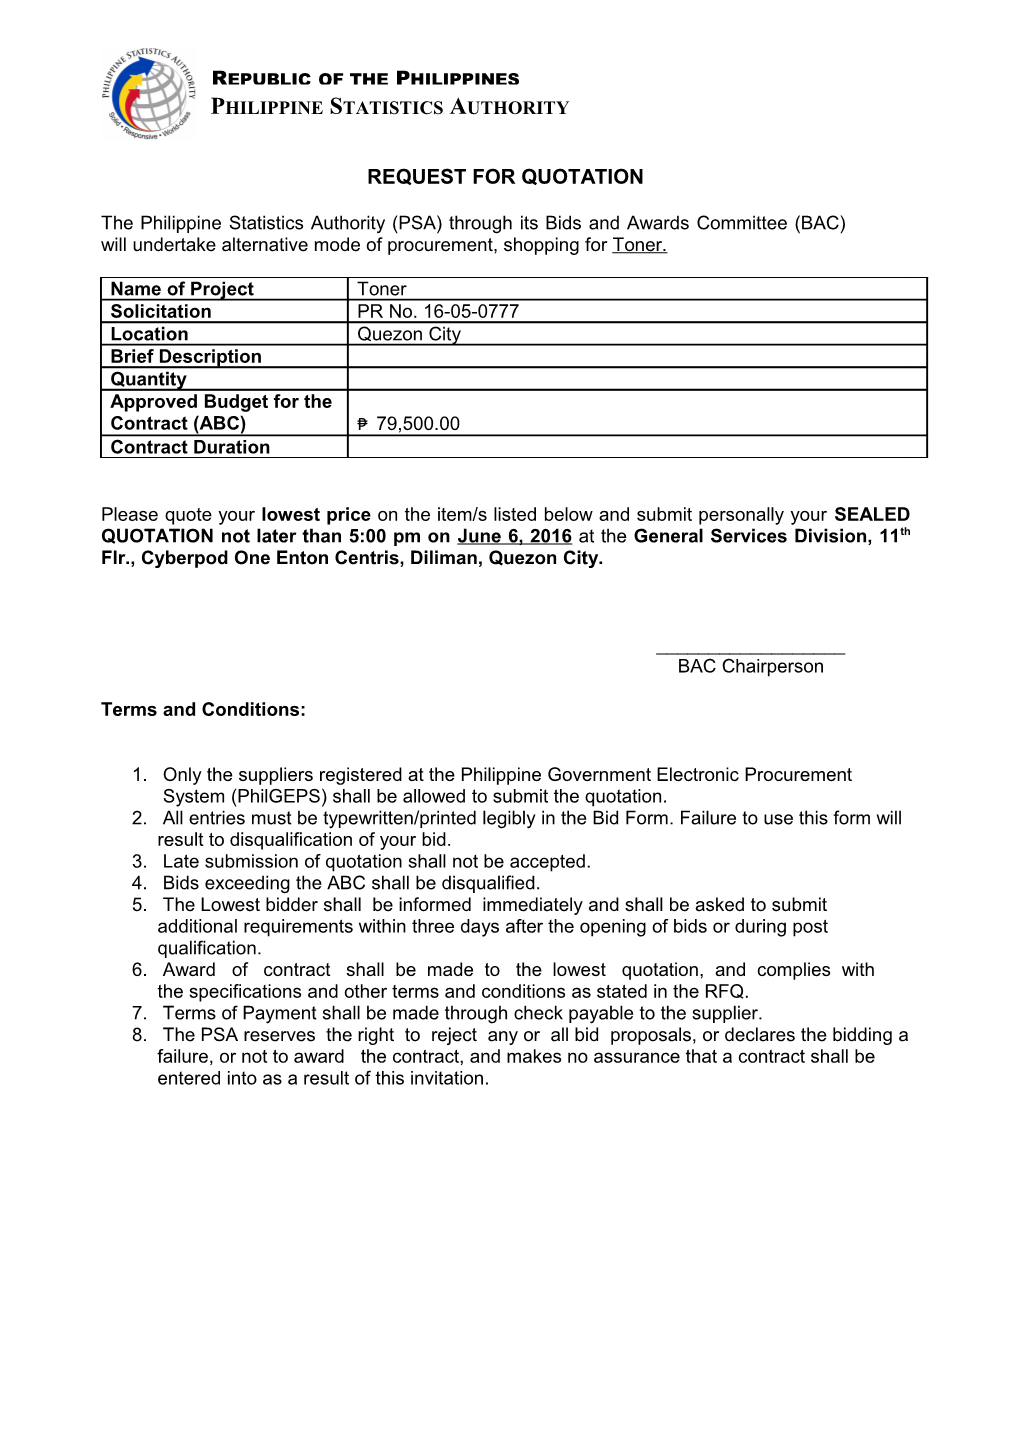 Request for Quotation s58